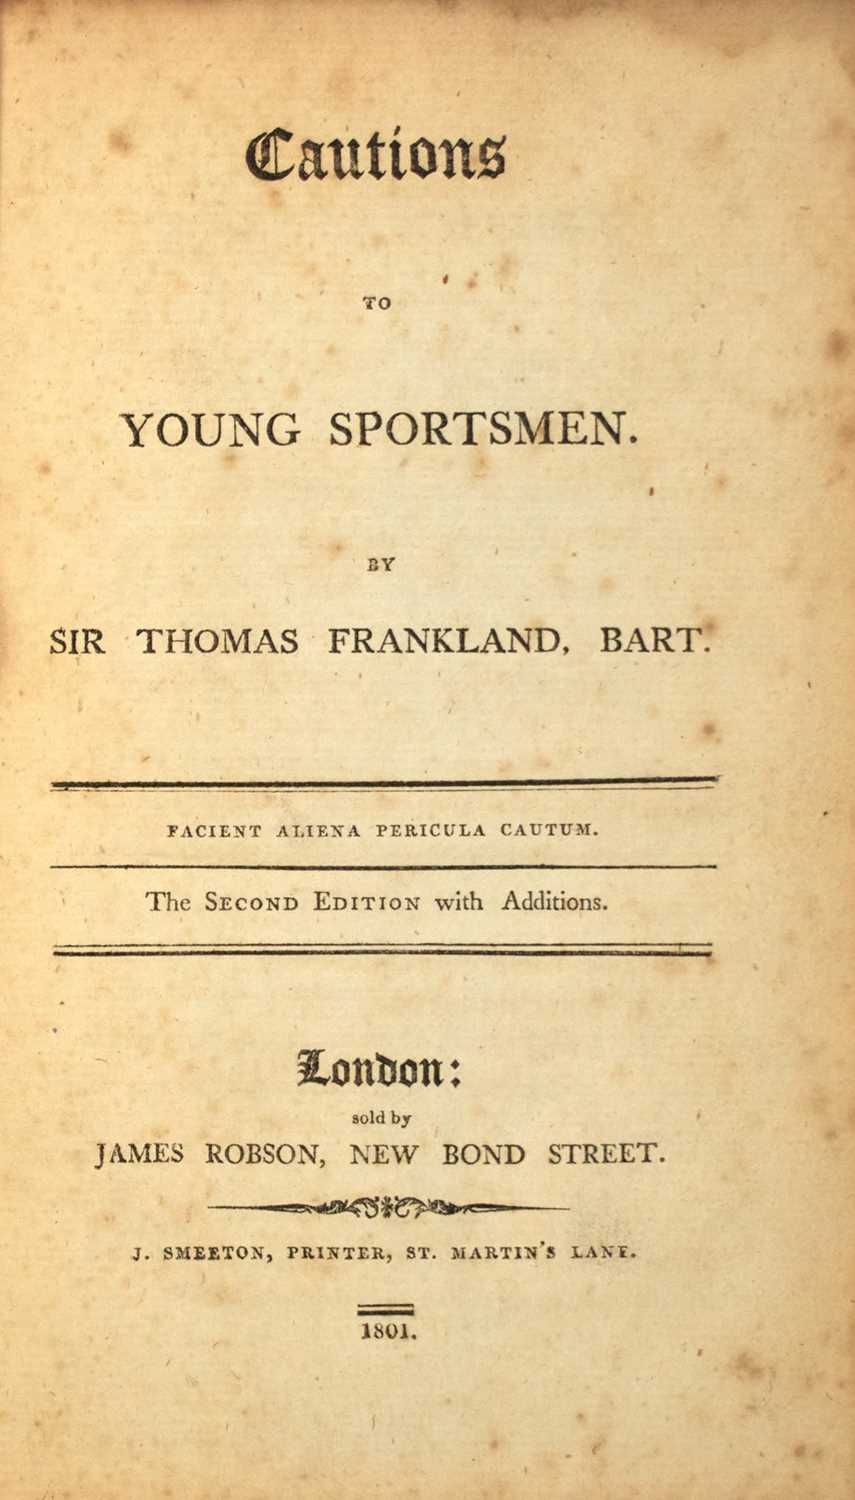 Lot 78 - [SPORTING]
FRANKLAND, SIR THOMAS. Cautions to Young Sportsmen.